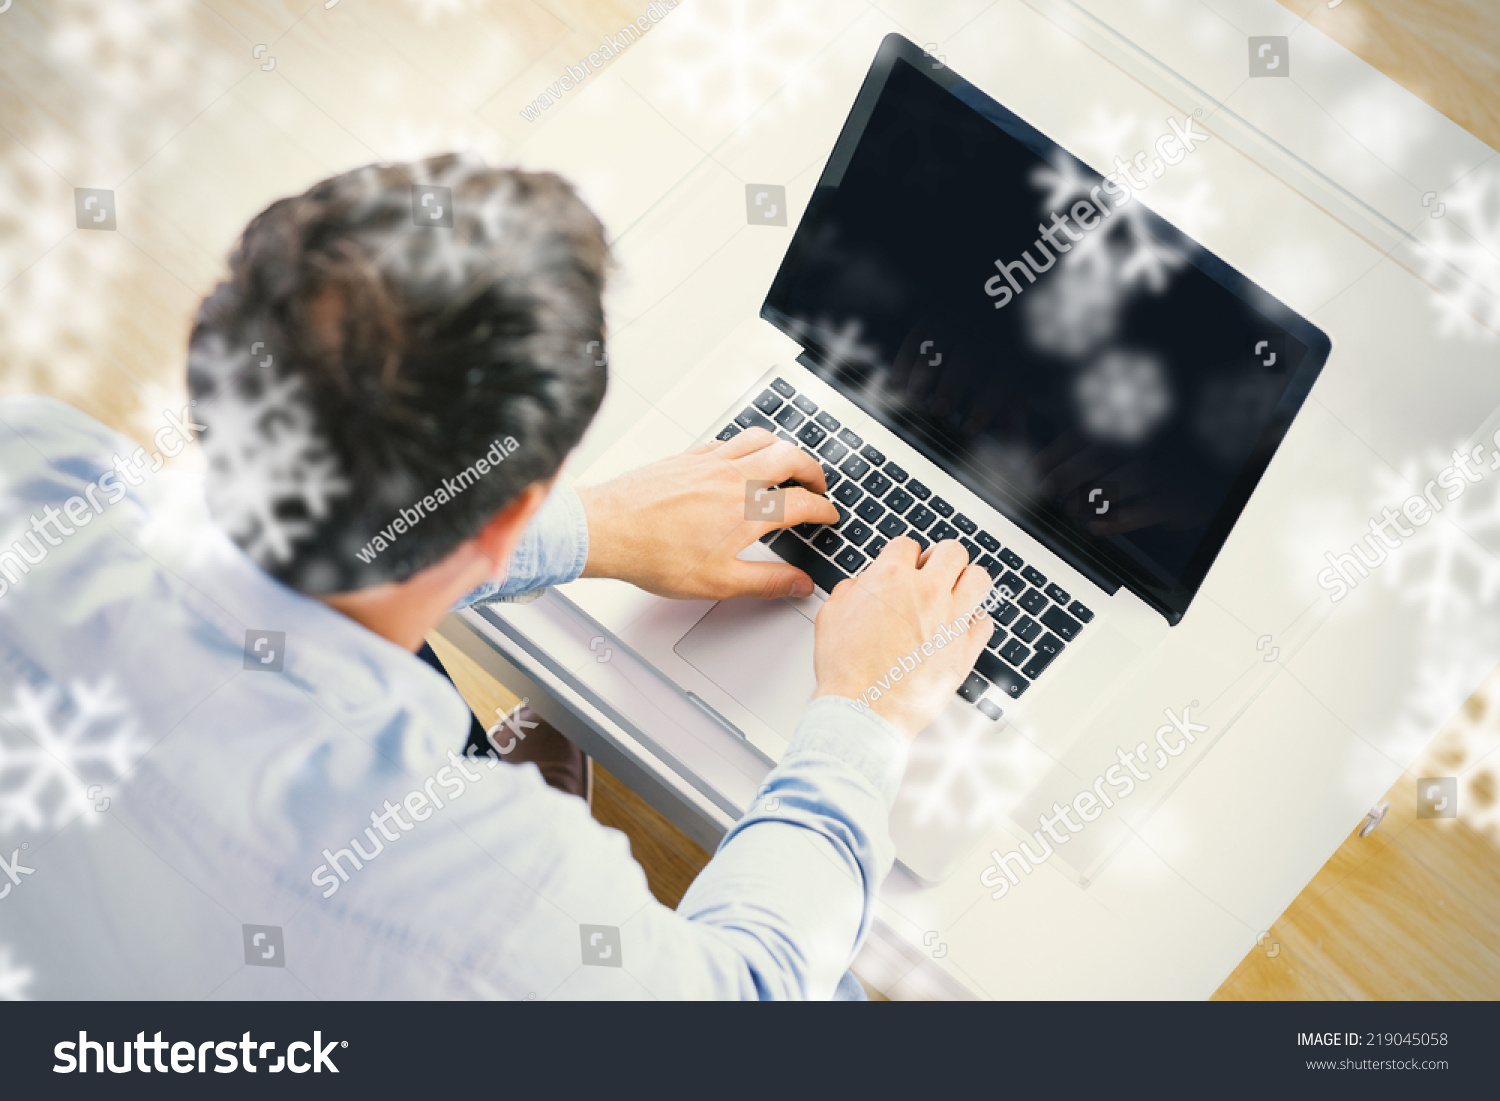 High angle view of casual man using laptop against snowflakes #219045058